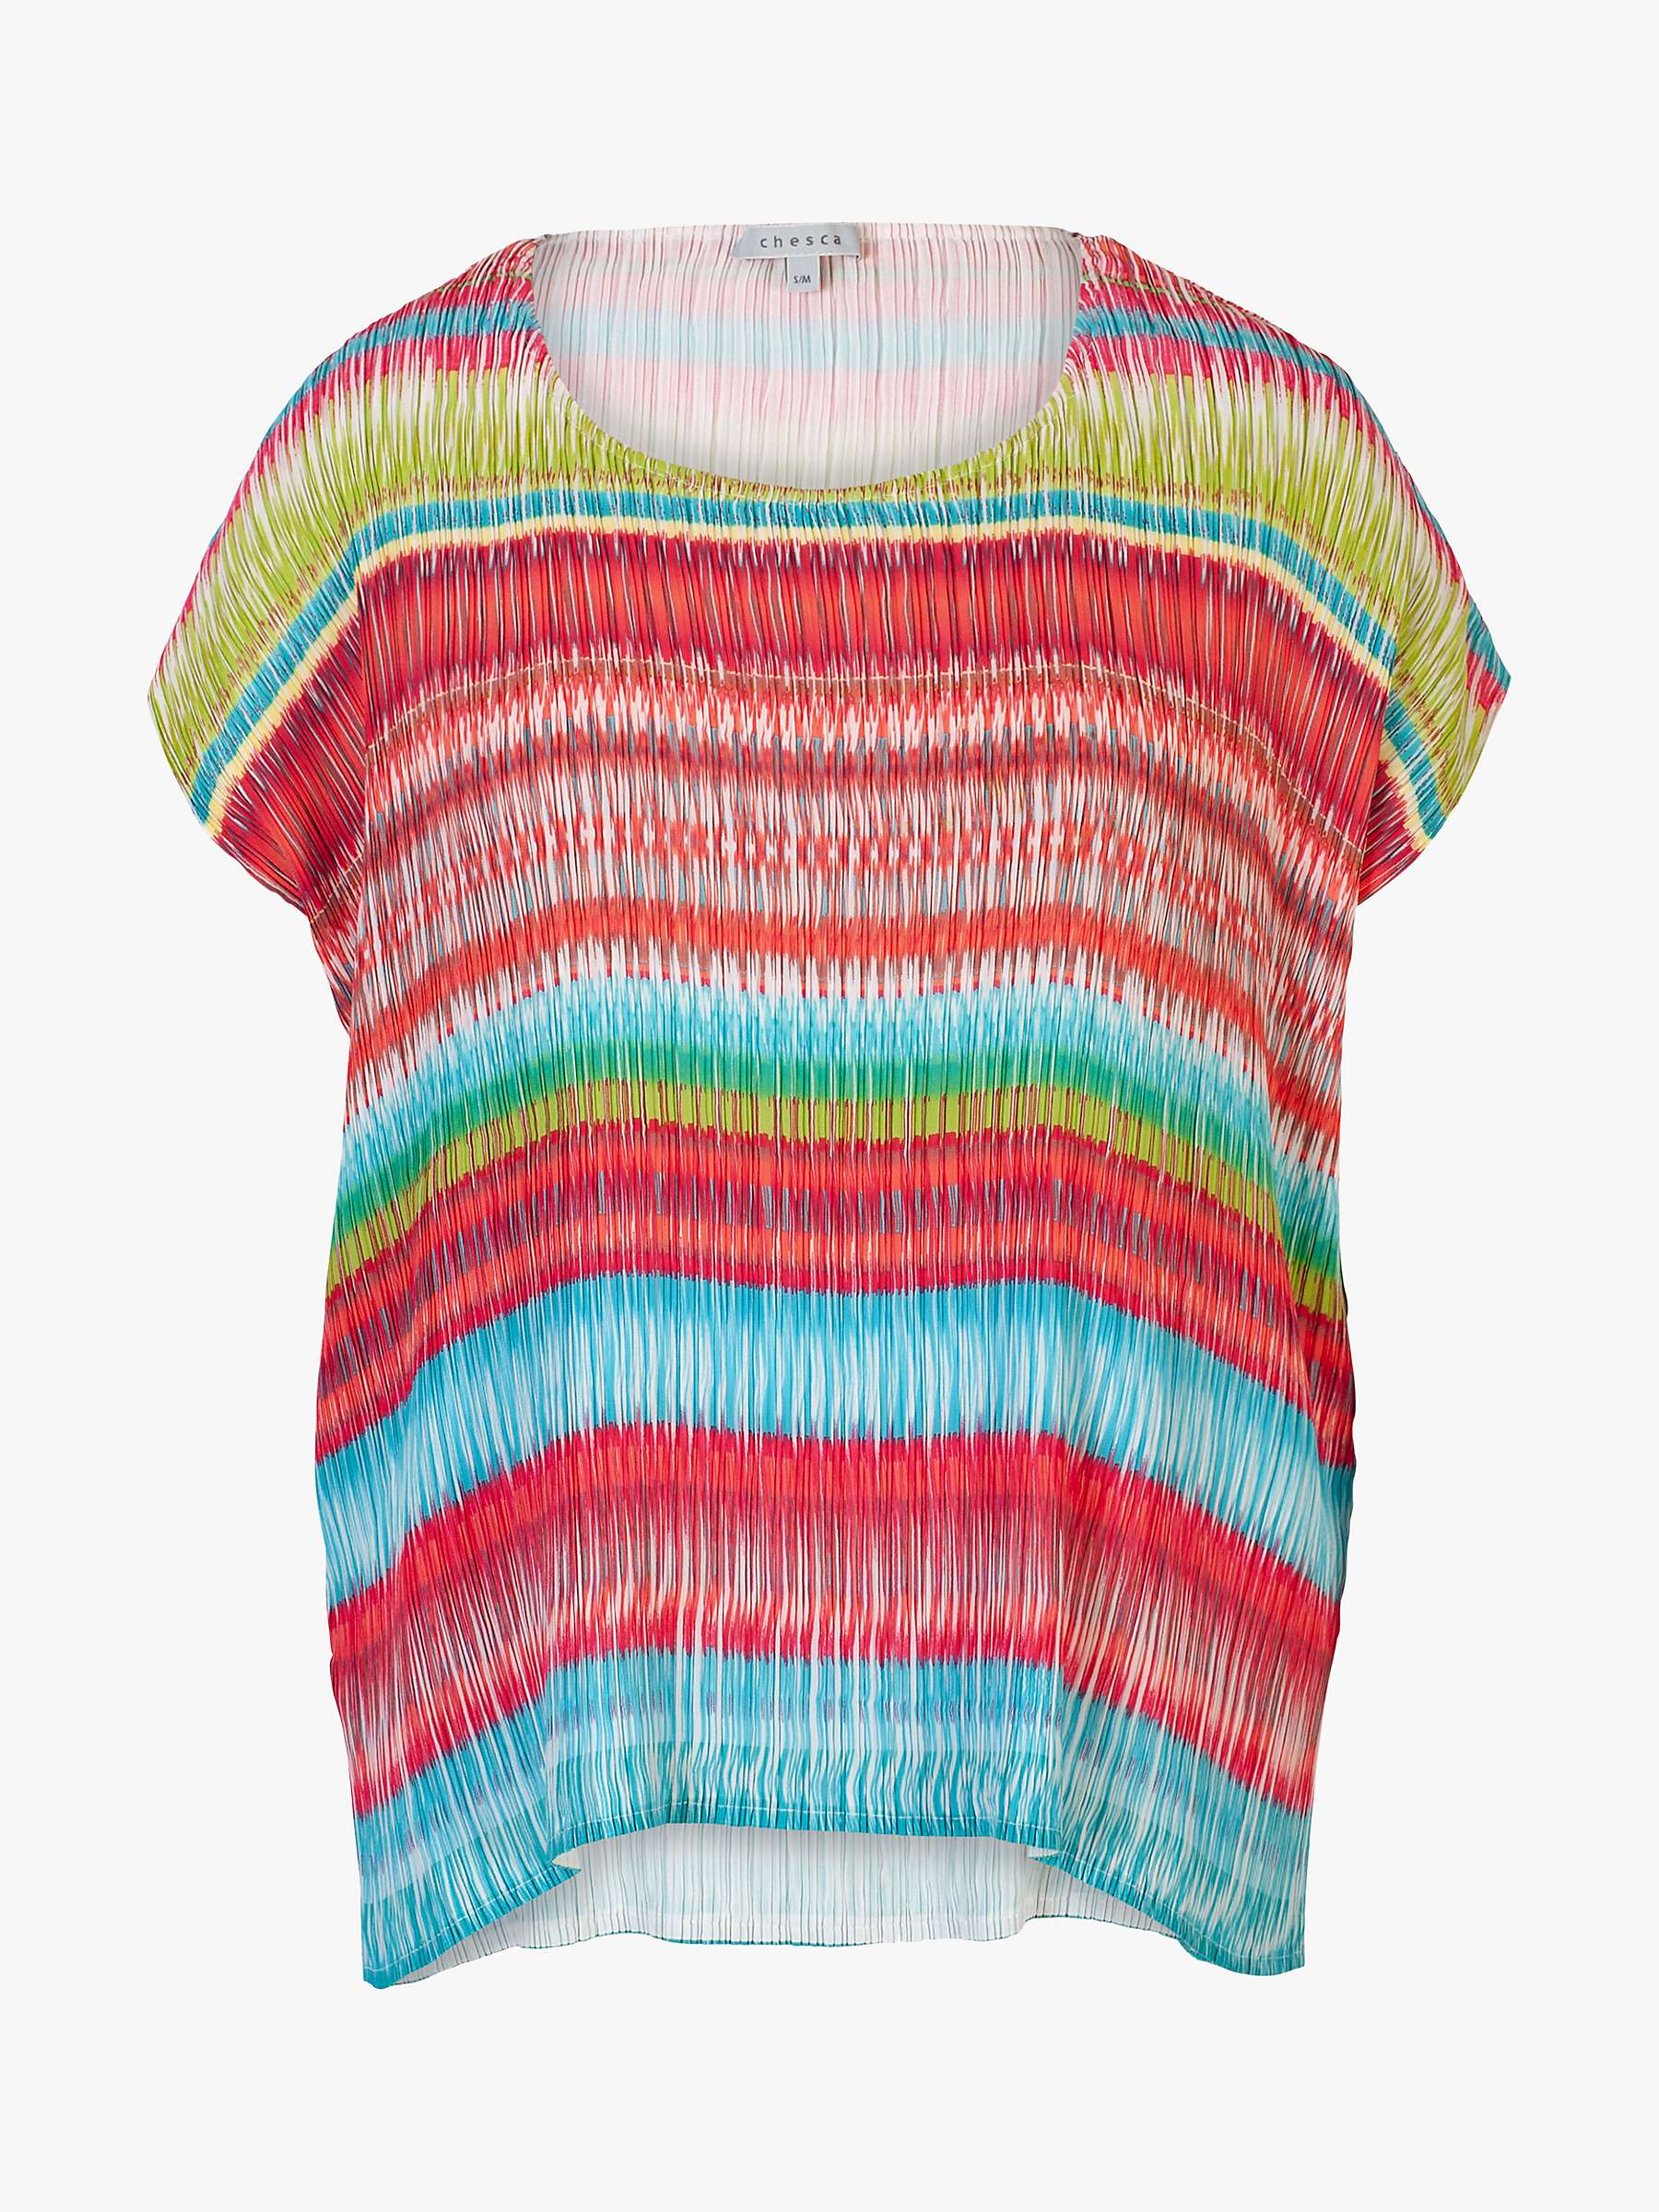 Buy chesca Stripe Print Short Sleeve Top, Coral/Multi Online at johnlewis.com